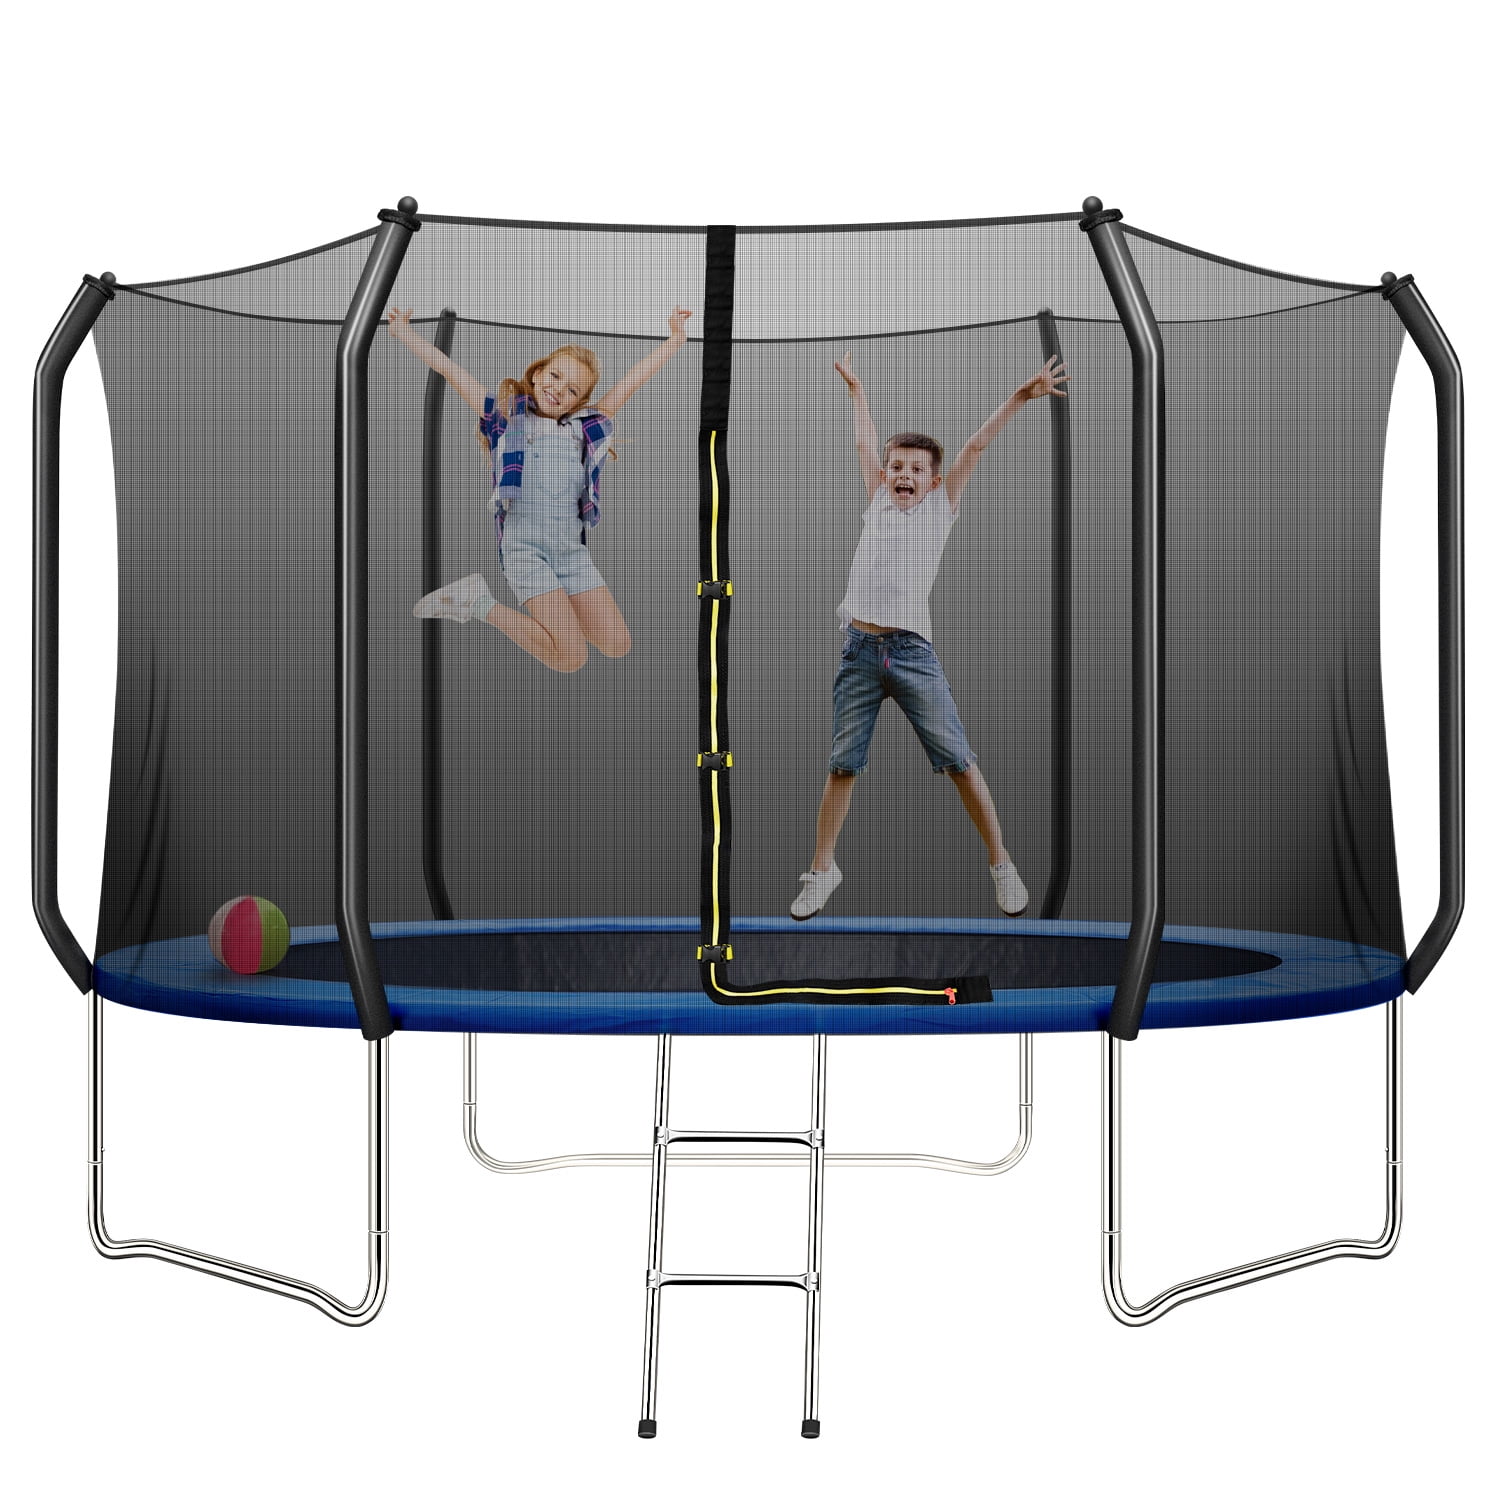 10 FT Trampoline with Safety Net, Exercise Trampoline for Kids and Adults with Jumping Mat, Ladder, 661 LB Weight Limit, Outdoor Fitness Backyard Trampolines, Best Gift - Walmart.com